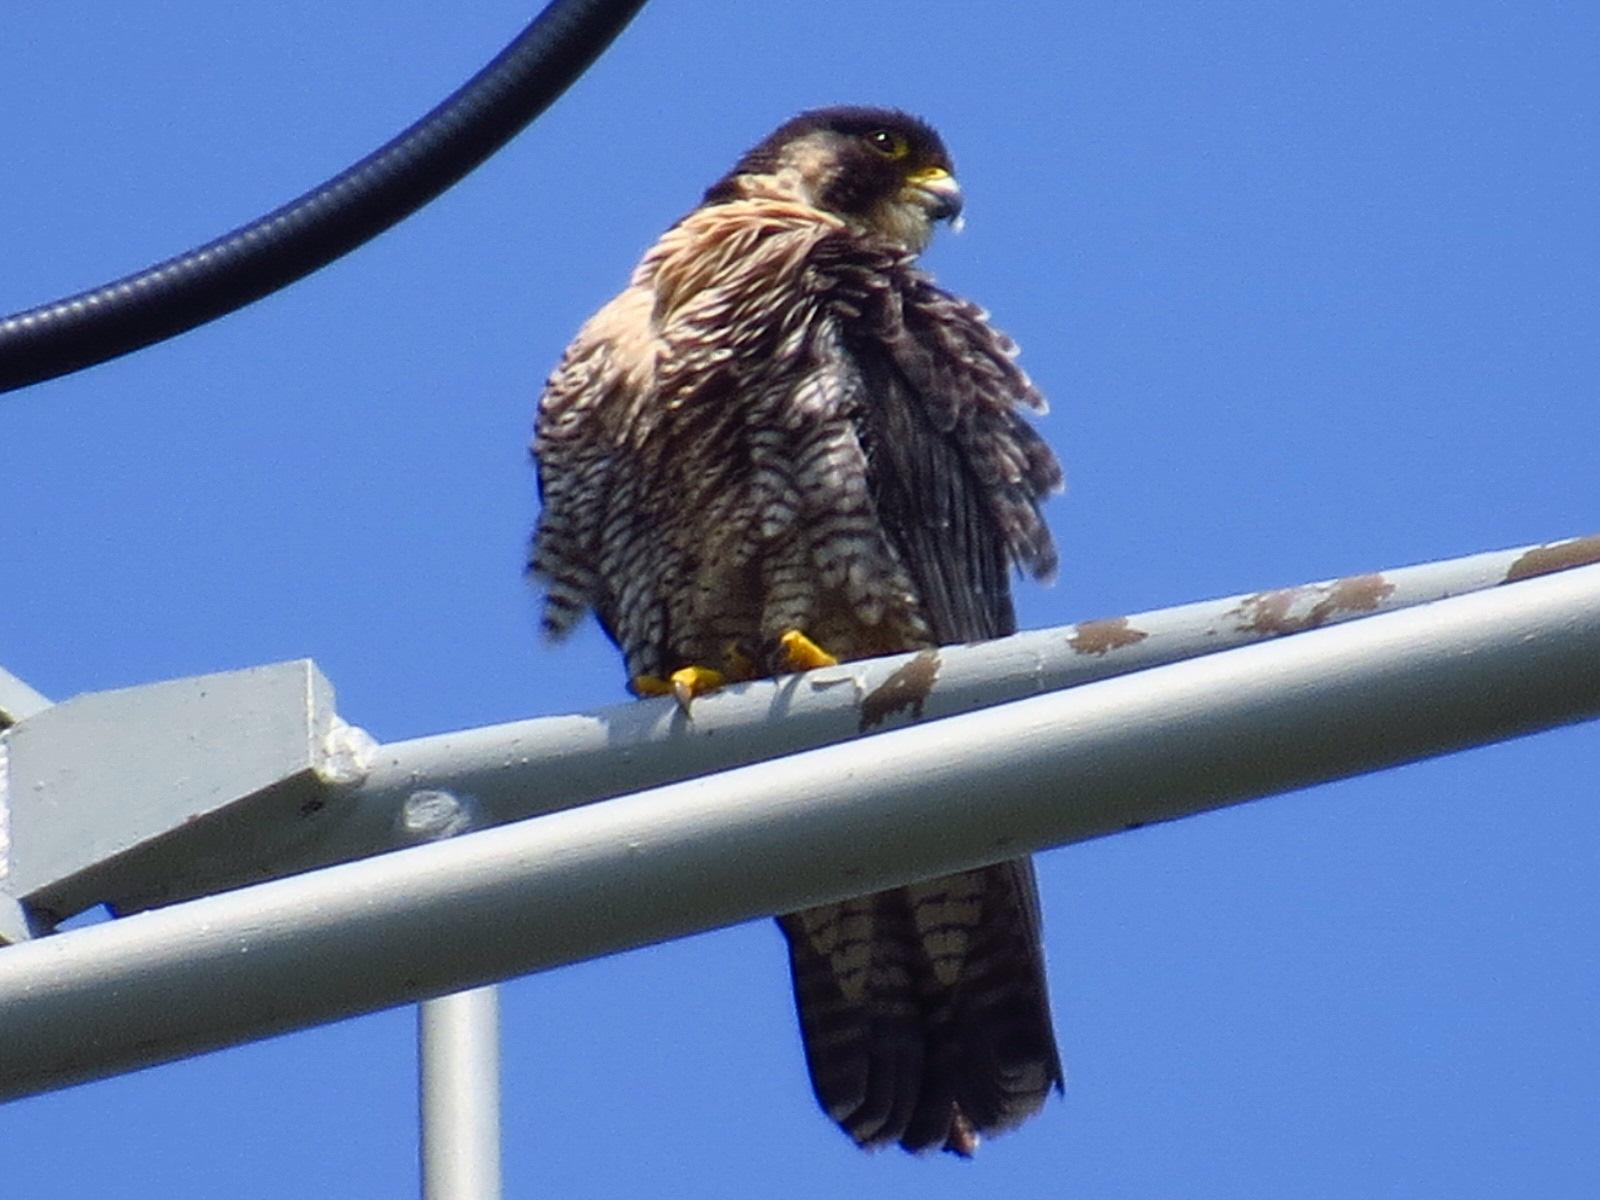 Peregrine Falcon Photo by Kathy Wooding